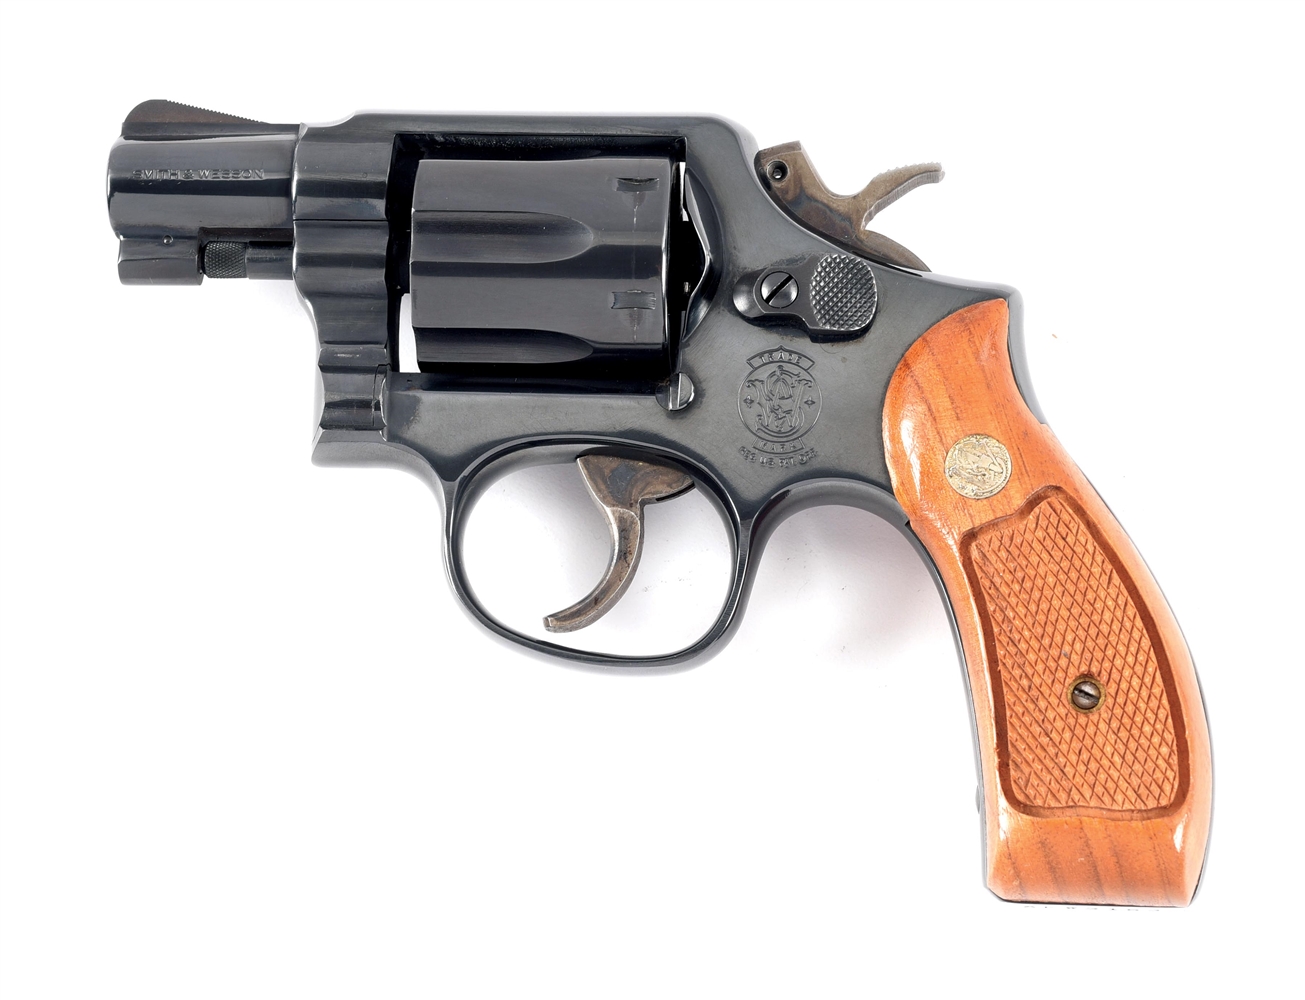 (M) PERUVIAN POLICE MARKED SMITH & WESSON 10-7 DOUBLE ACTION REVOLVER.